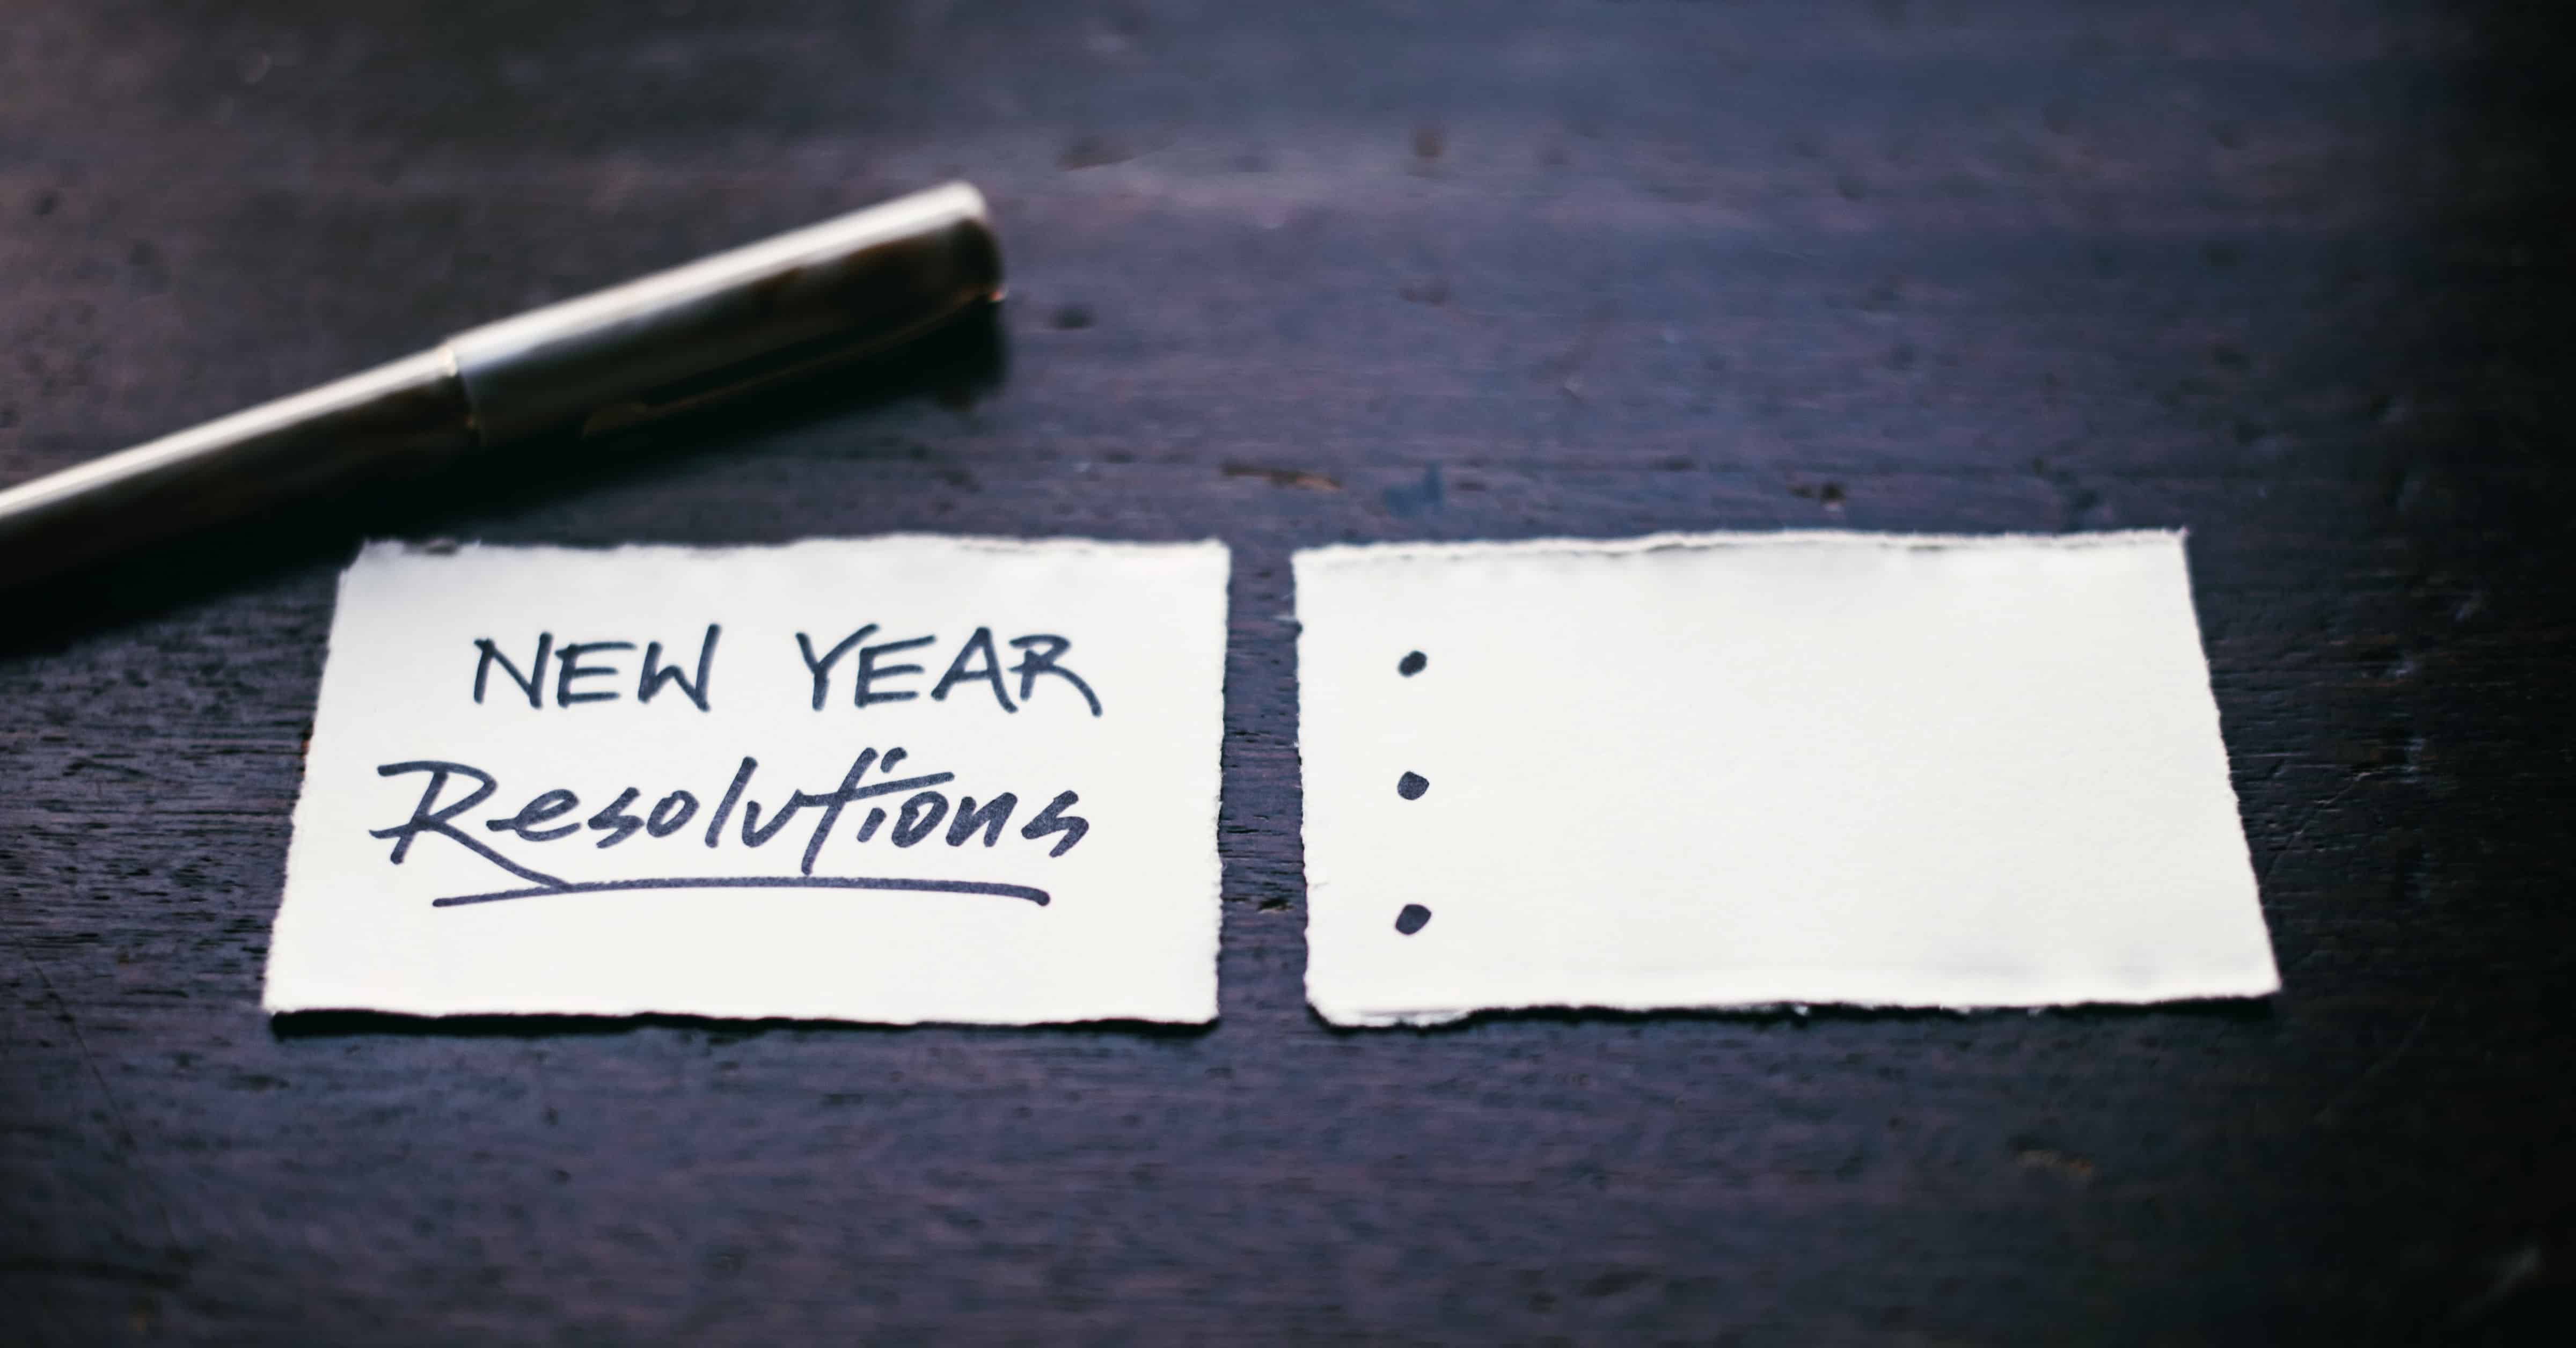 New Year Resolutions - stock image of pen with index cards for writing resolutions